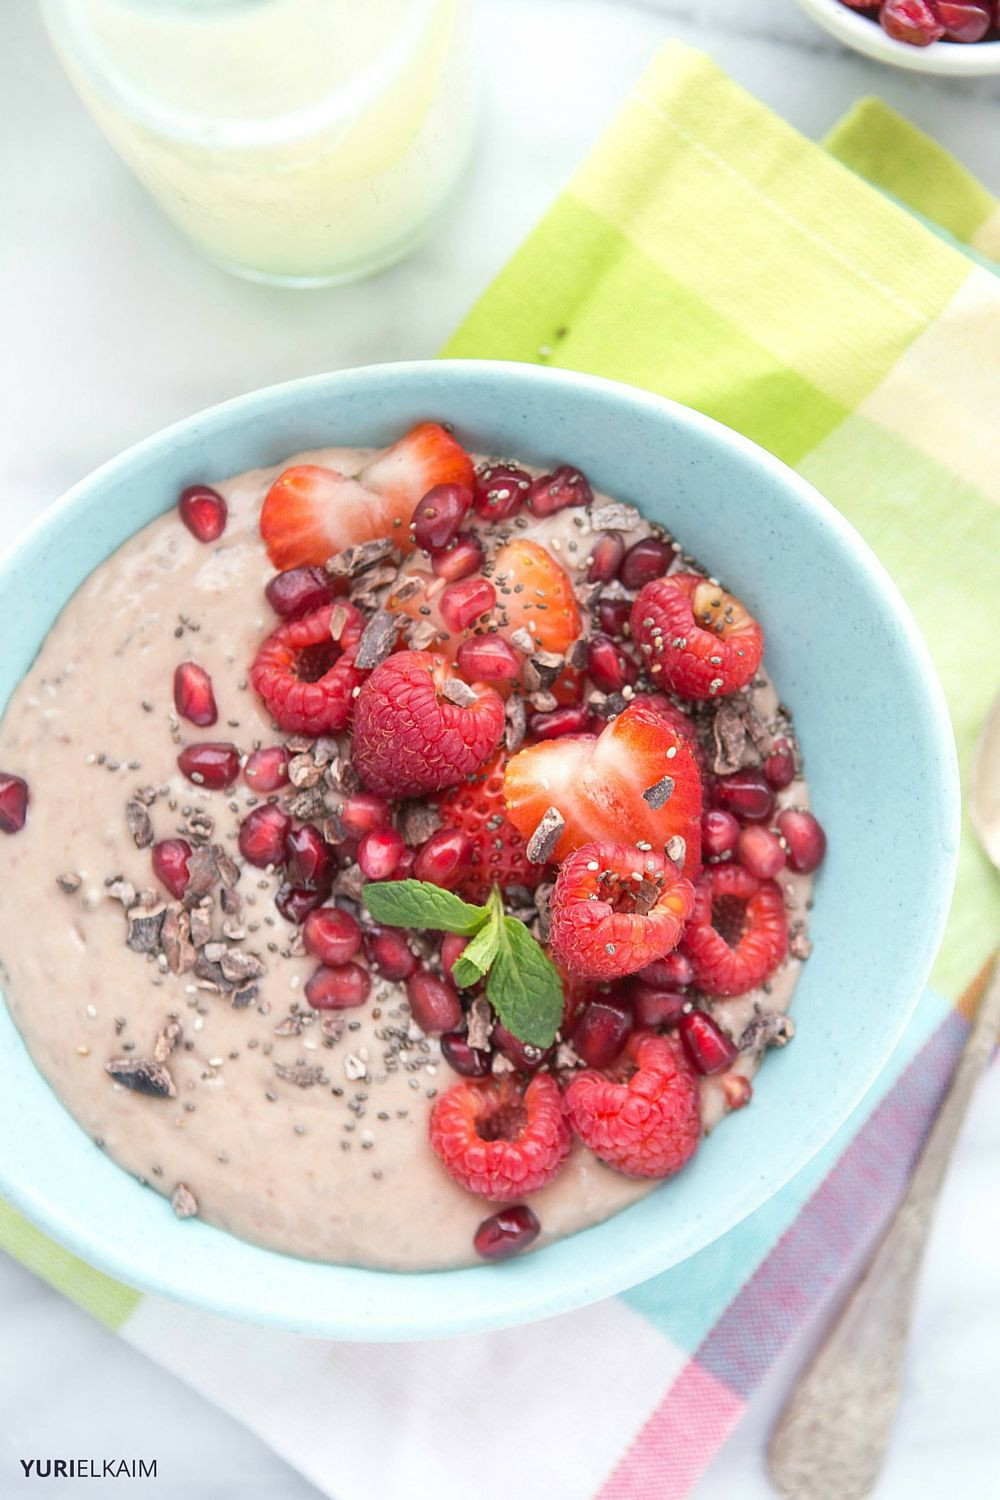 Chia Seed Breakfast Recipe
 The Chocolate Chia Seed Pudding Recipe That Will Make You